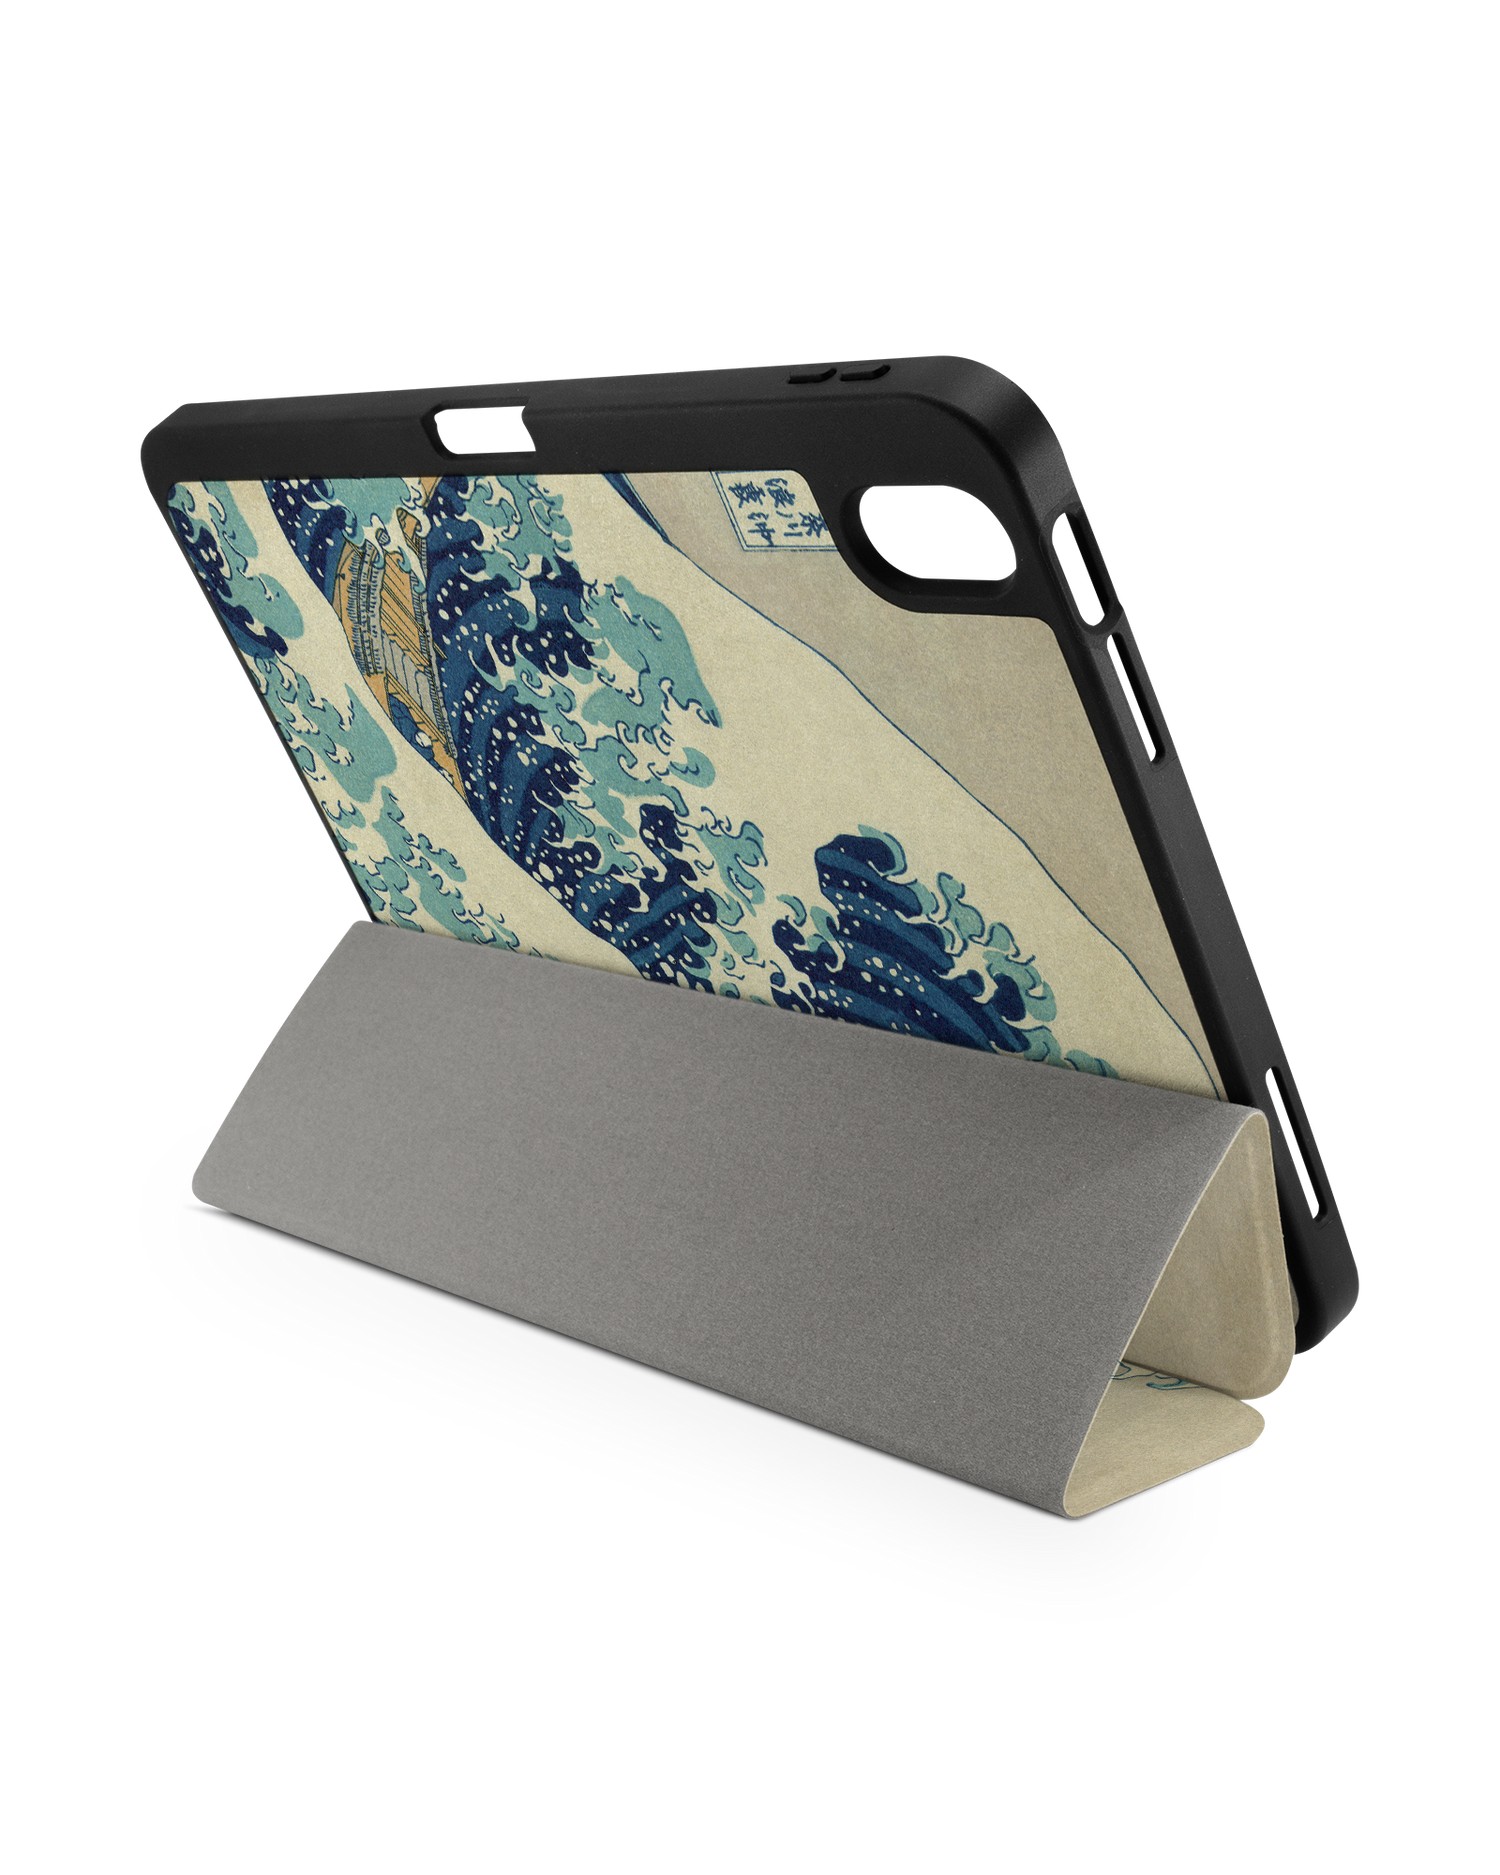 Great Wave Off Kanagawa By Hokusai iPad Case with Pencil Holder for Apple iPad (10th Generation): Set up in landscape format (back view)